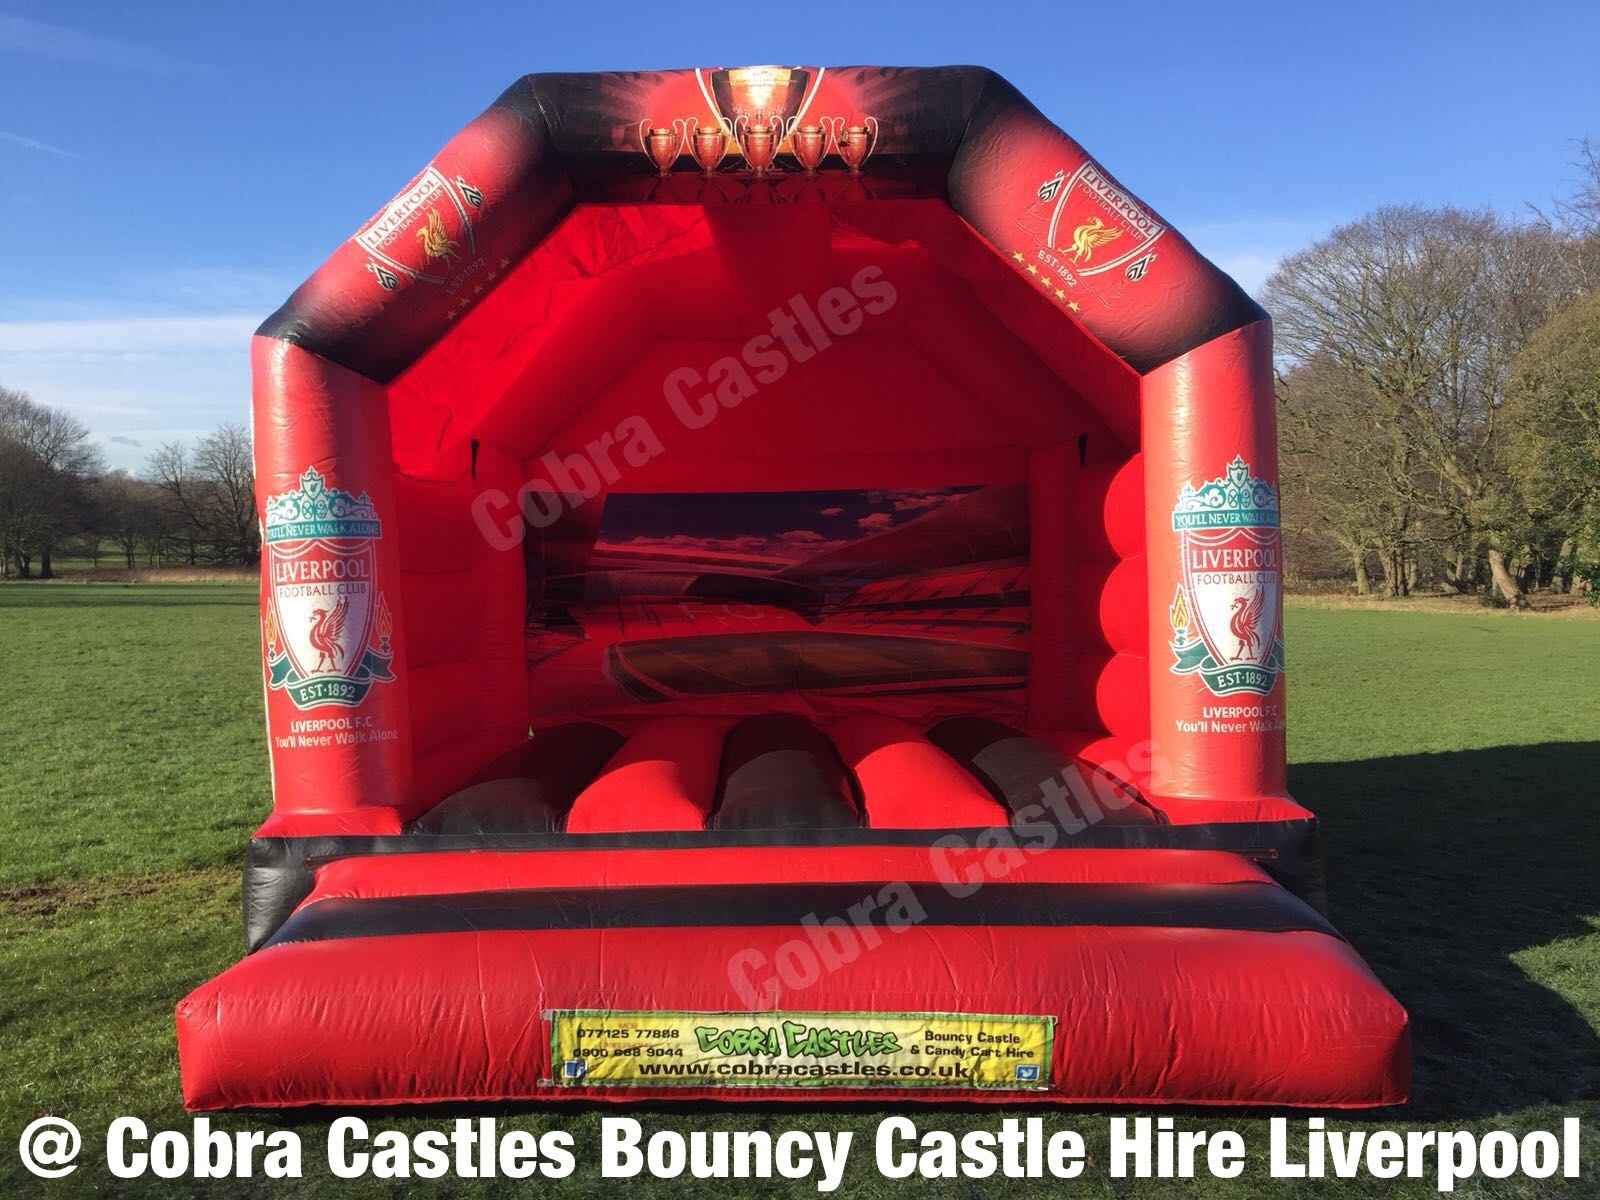 Liverpool Fc Bouncy Castle 15 X 15 Bouncy Castle Hire In Liverpool Widnes Wirral St Helens Merseyside